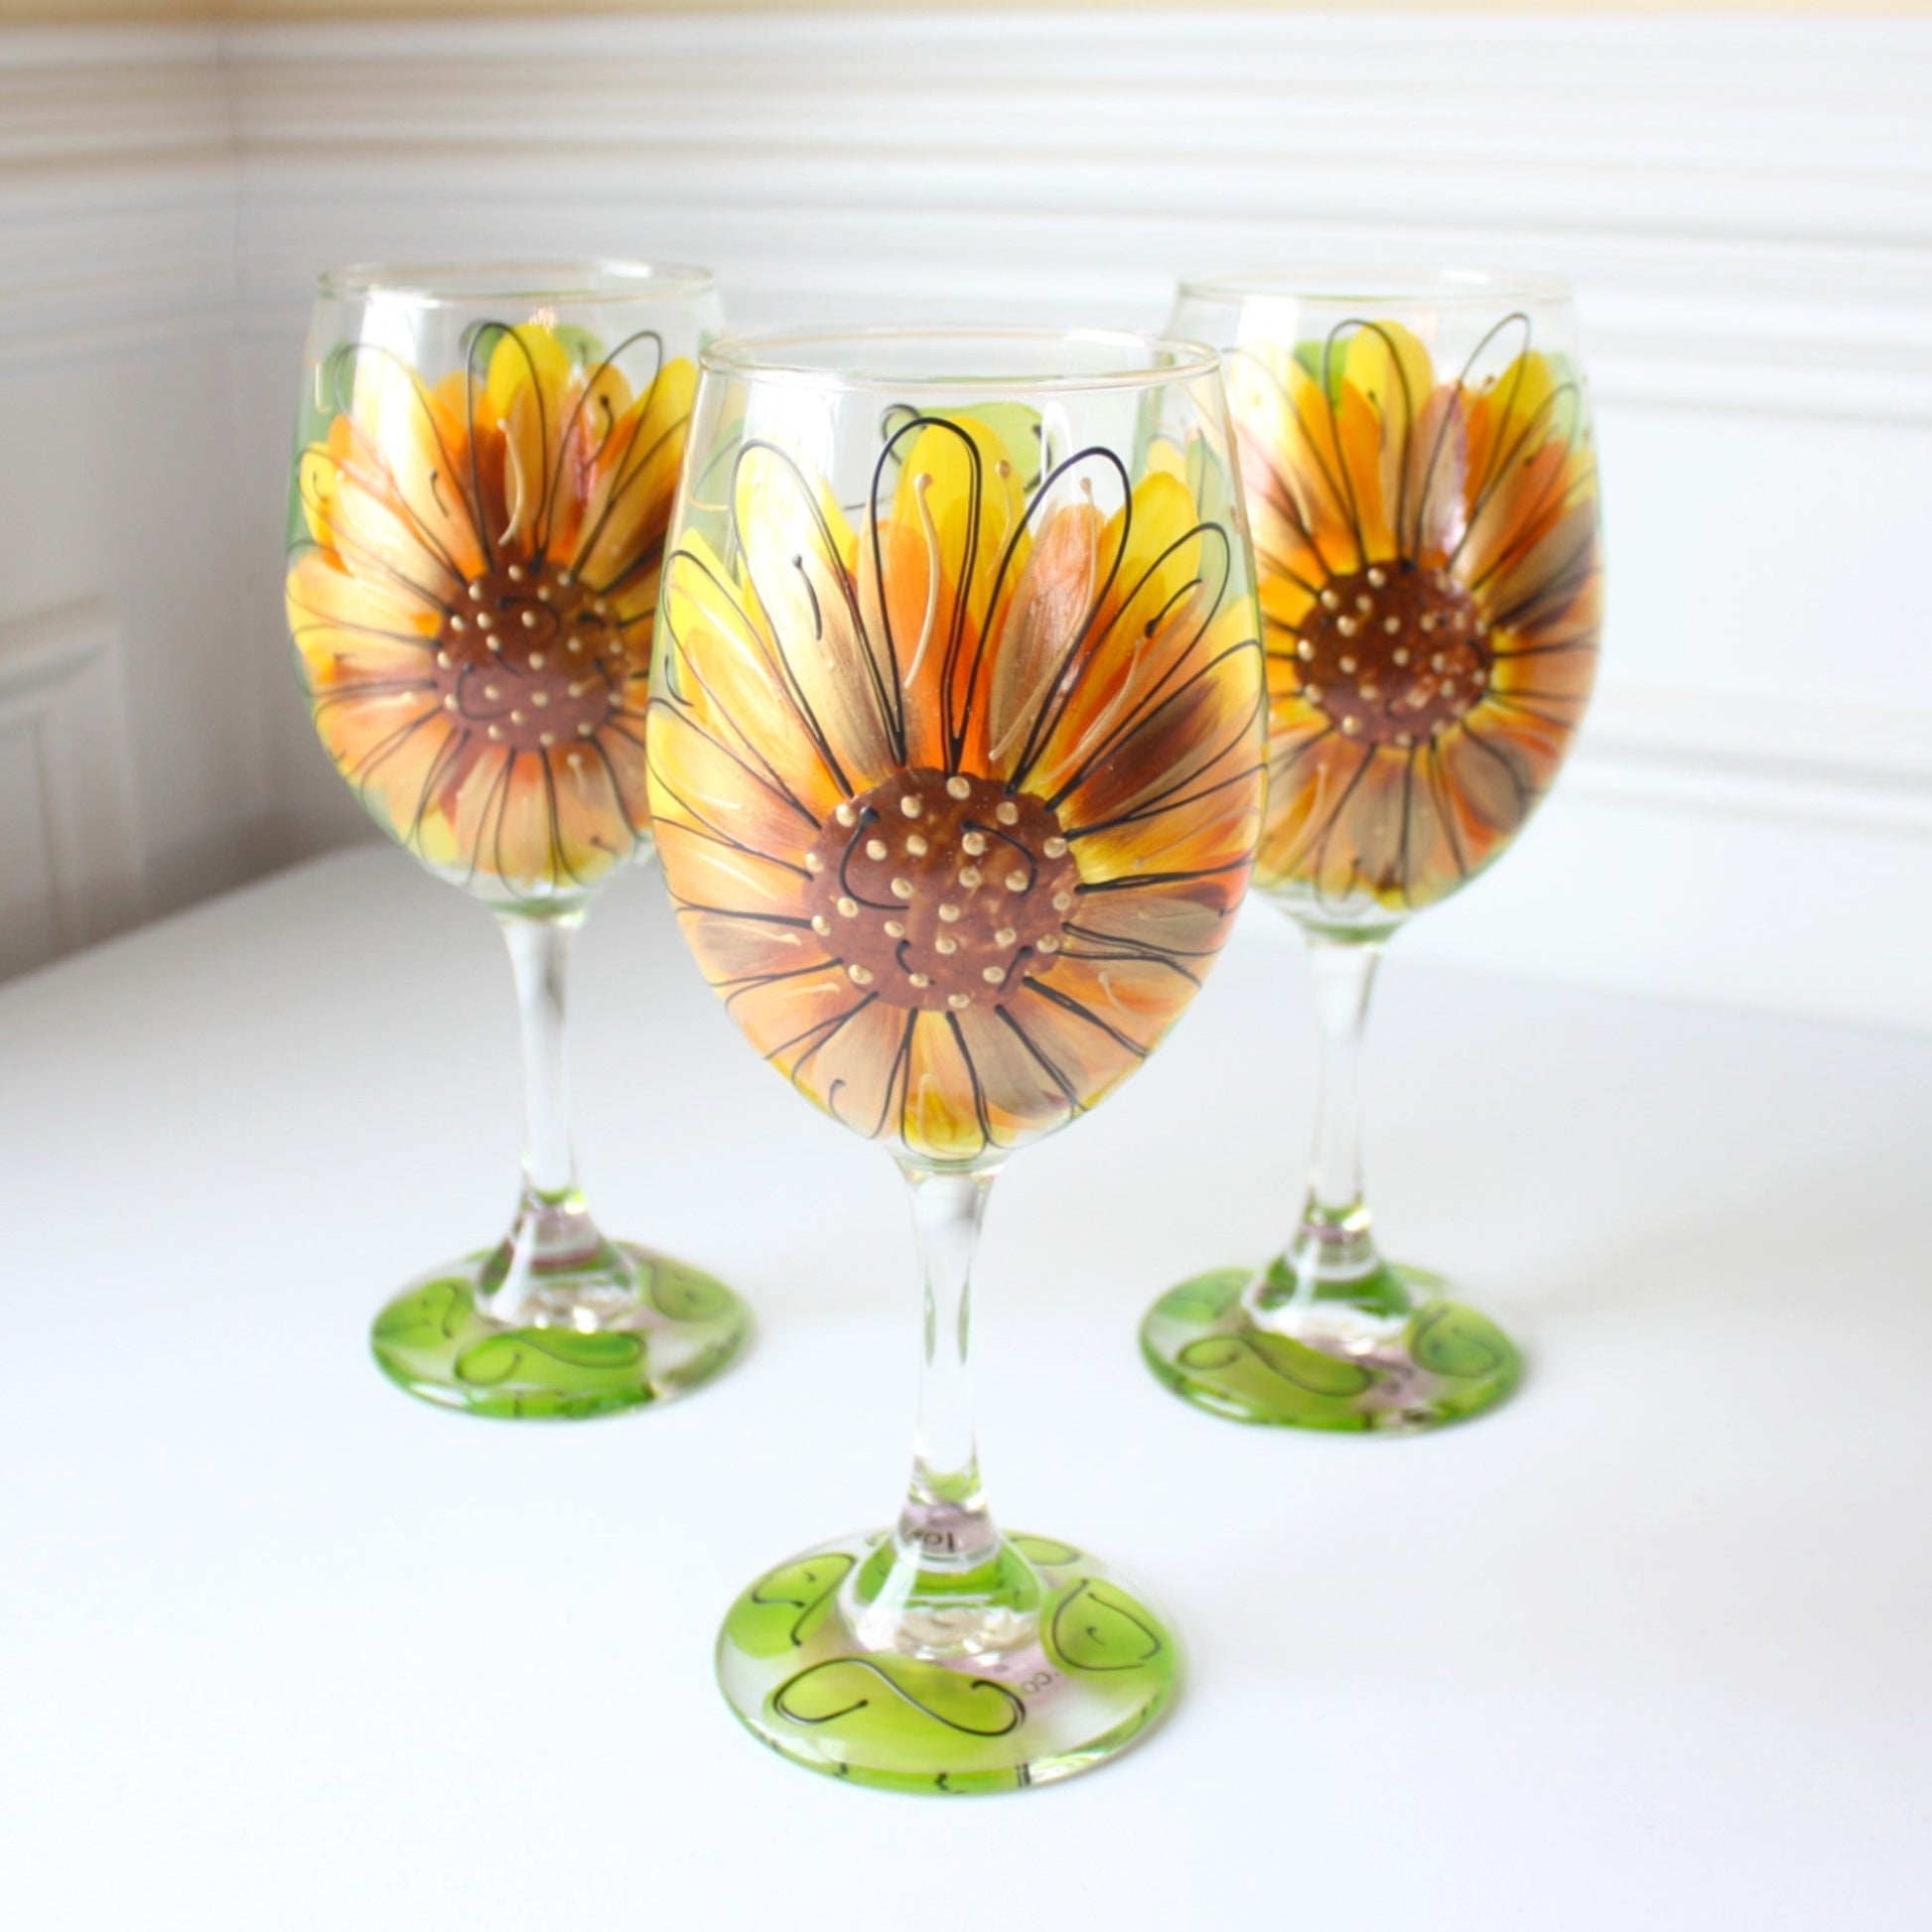 Hand Painted Wine Glasses - Sunflower - Made in the USA